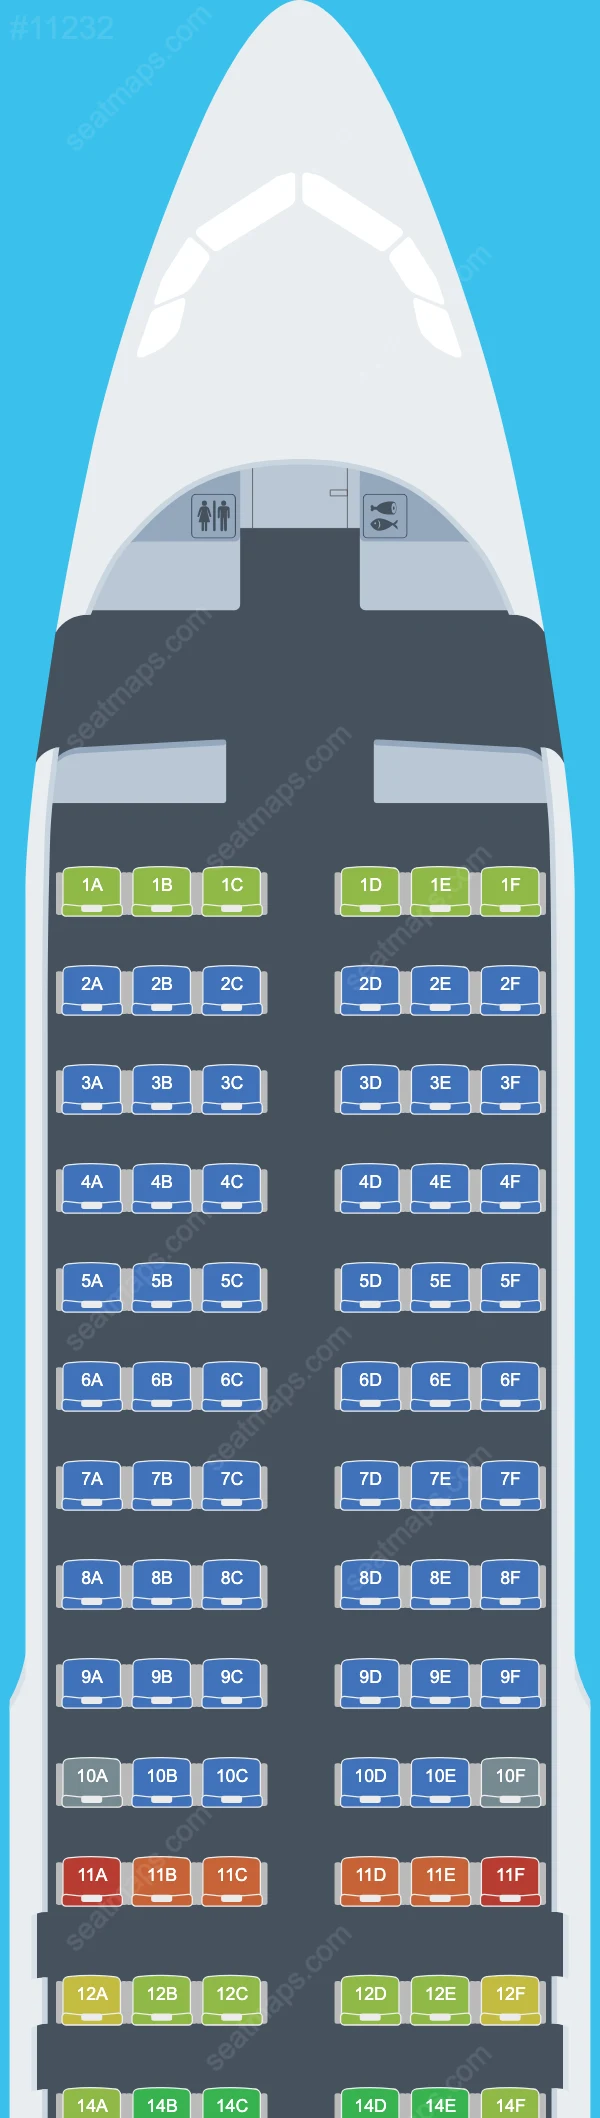 Network Aviation Airbus A320 Seat Maps A320-200 V.3